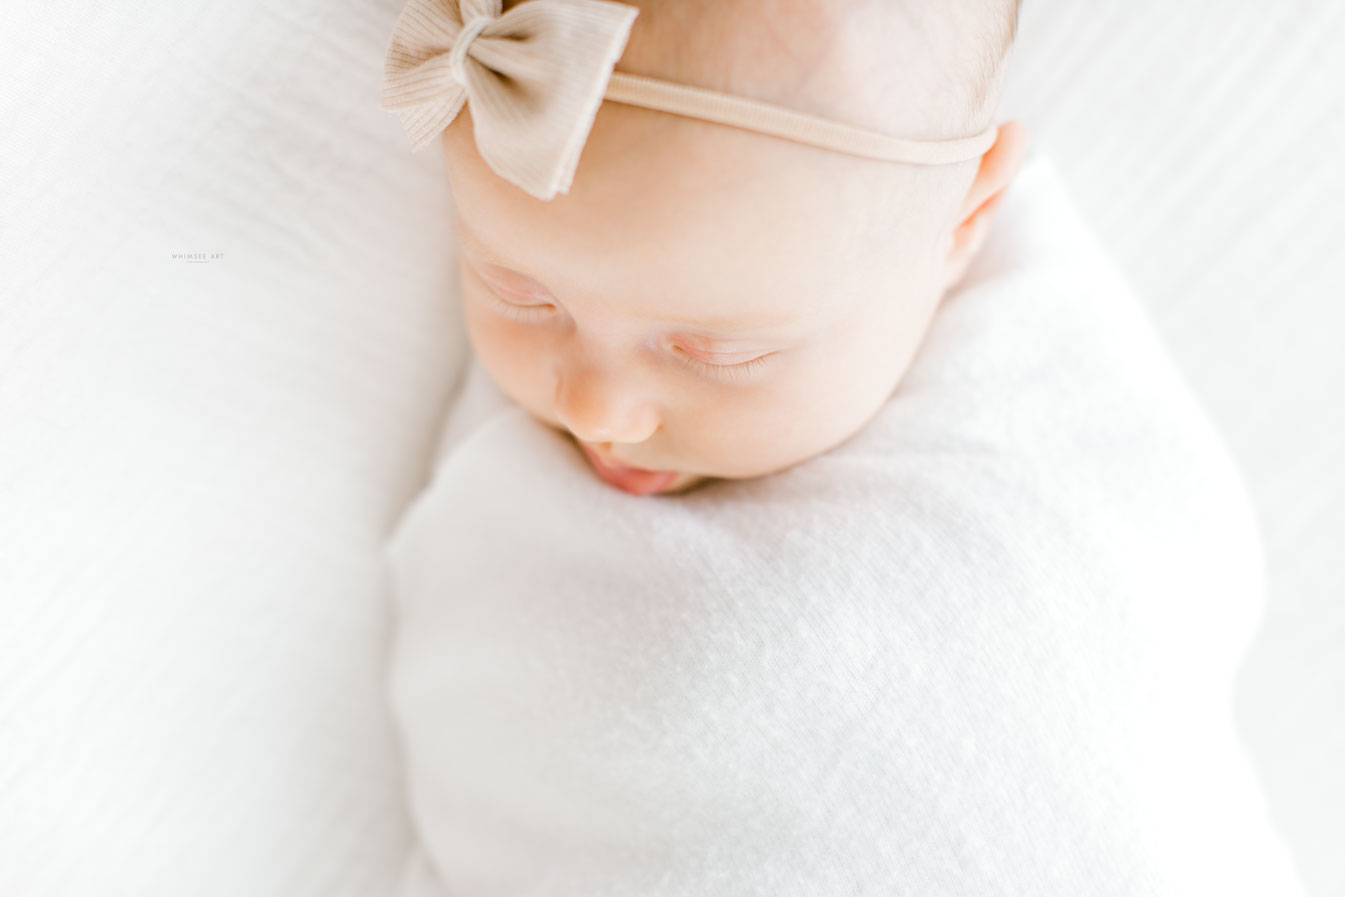 Sweet and Simple Newborn Session | Roanoke Newborn Photography | Roanoke Newborn Photographers